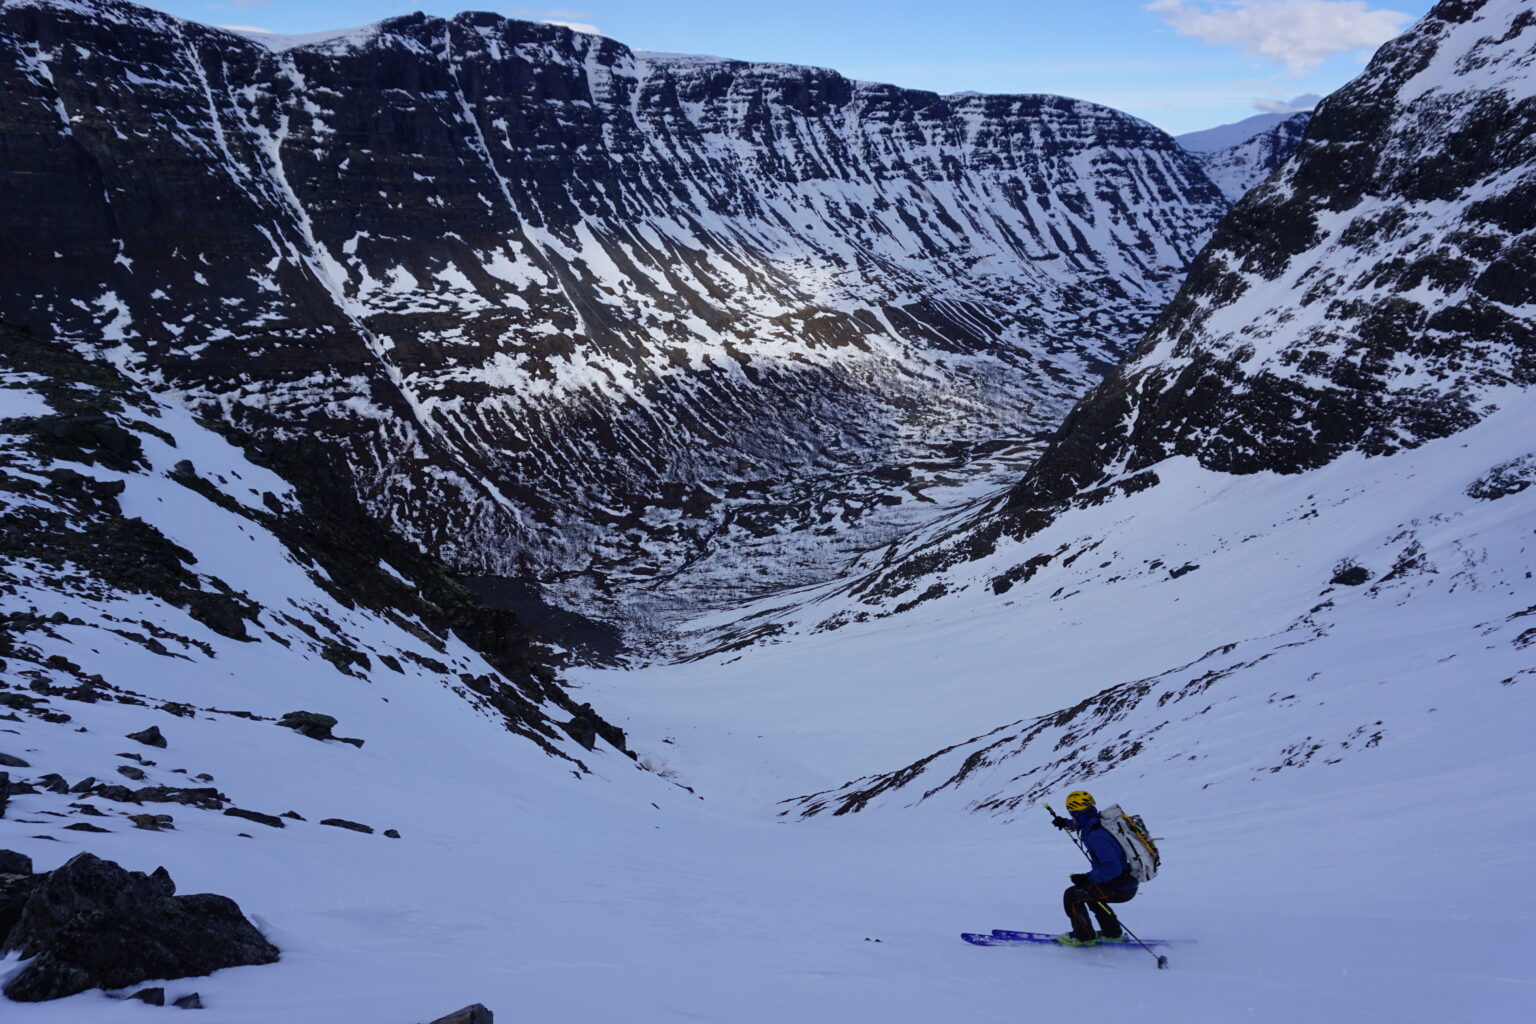 Skiing a couloir on the north side of Sommarfjellet